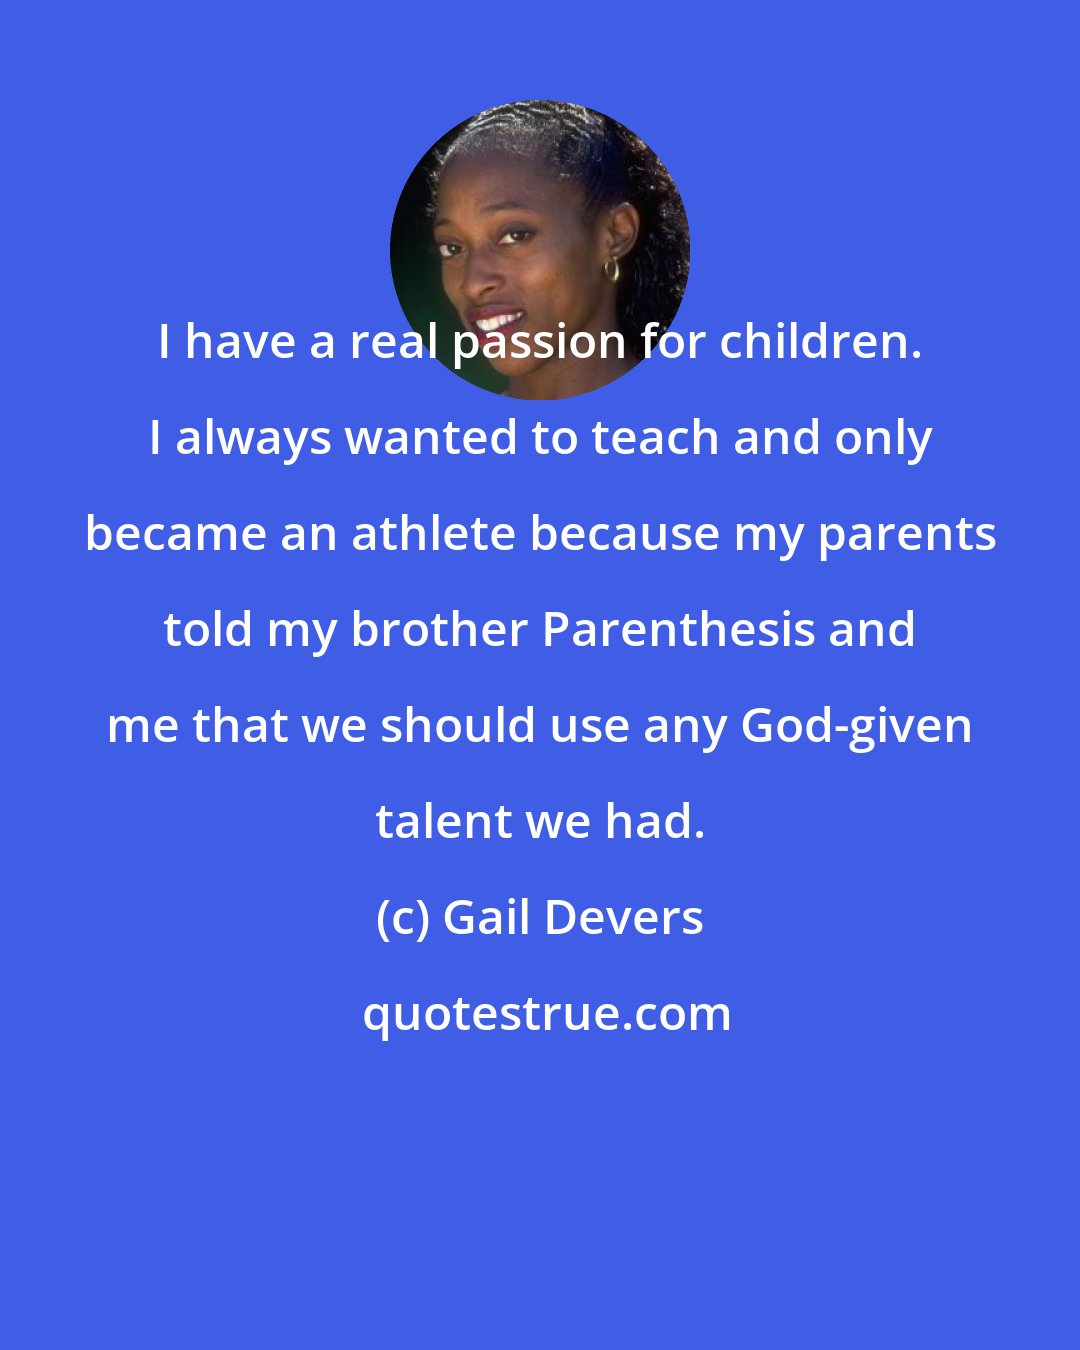 Gail Devers: I have a real passion for children. I always wanted to teach and only became an athlete because my parents told my brother Parenthesis and me that we should use any God-given talent we had.